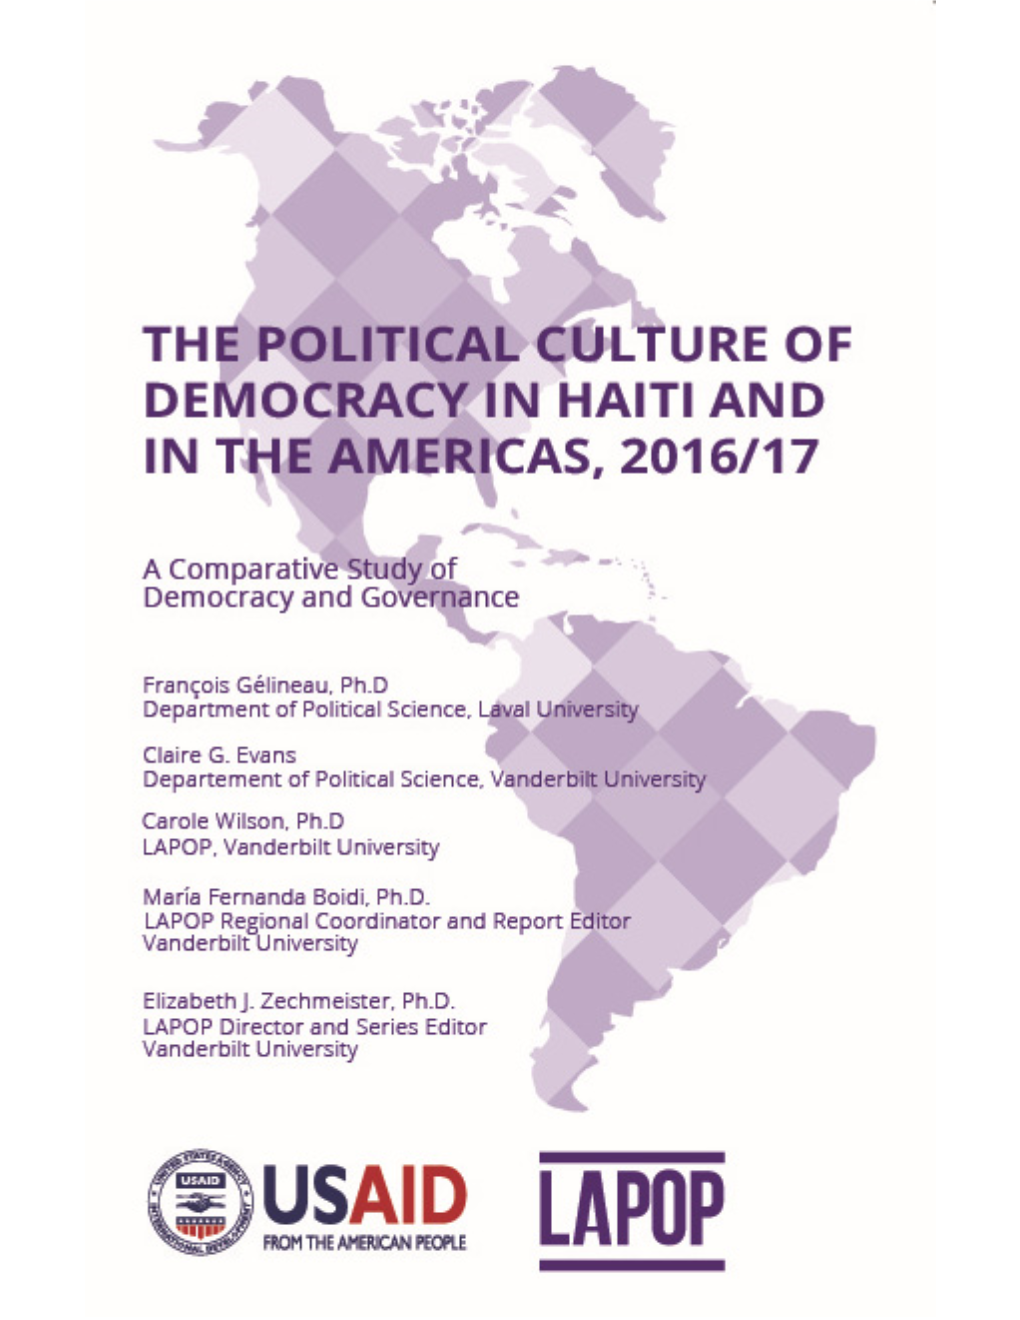 The Political Culture of Democracy in Haiti and in the Americas, 2016/17: a Comparative Study of Democracy and Governance